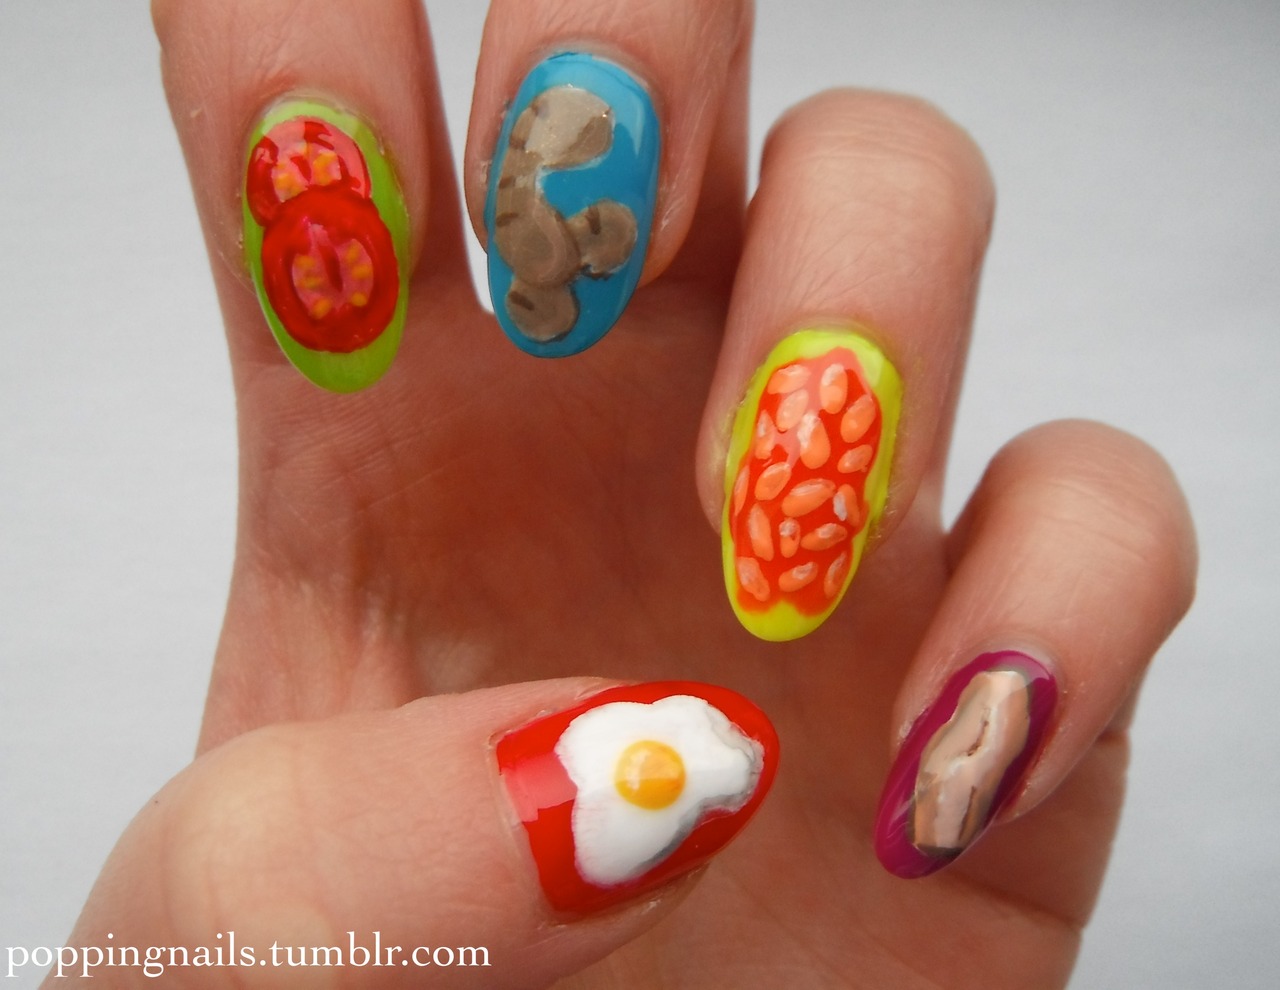 5. "Hilarious Nail Art Memes That Every Nail Lover Can Relate To" - wide 4